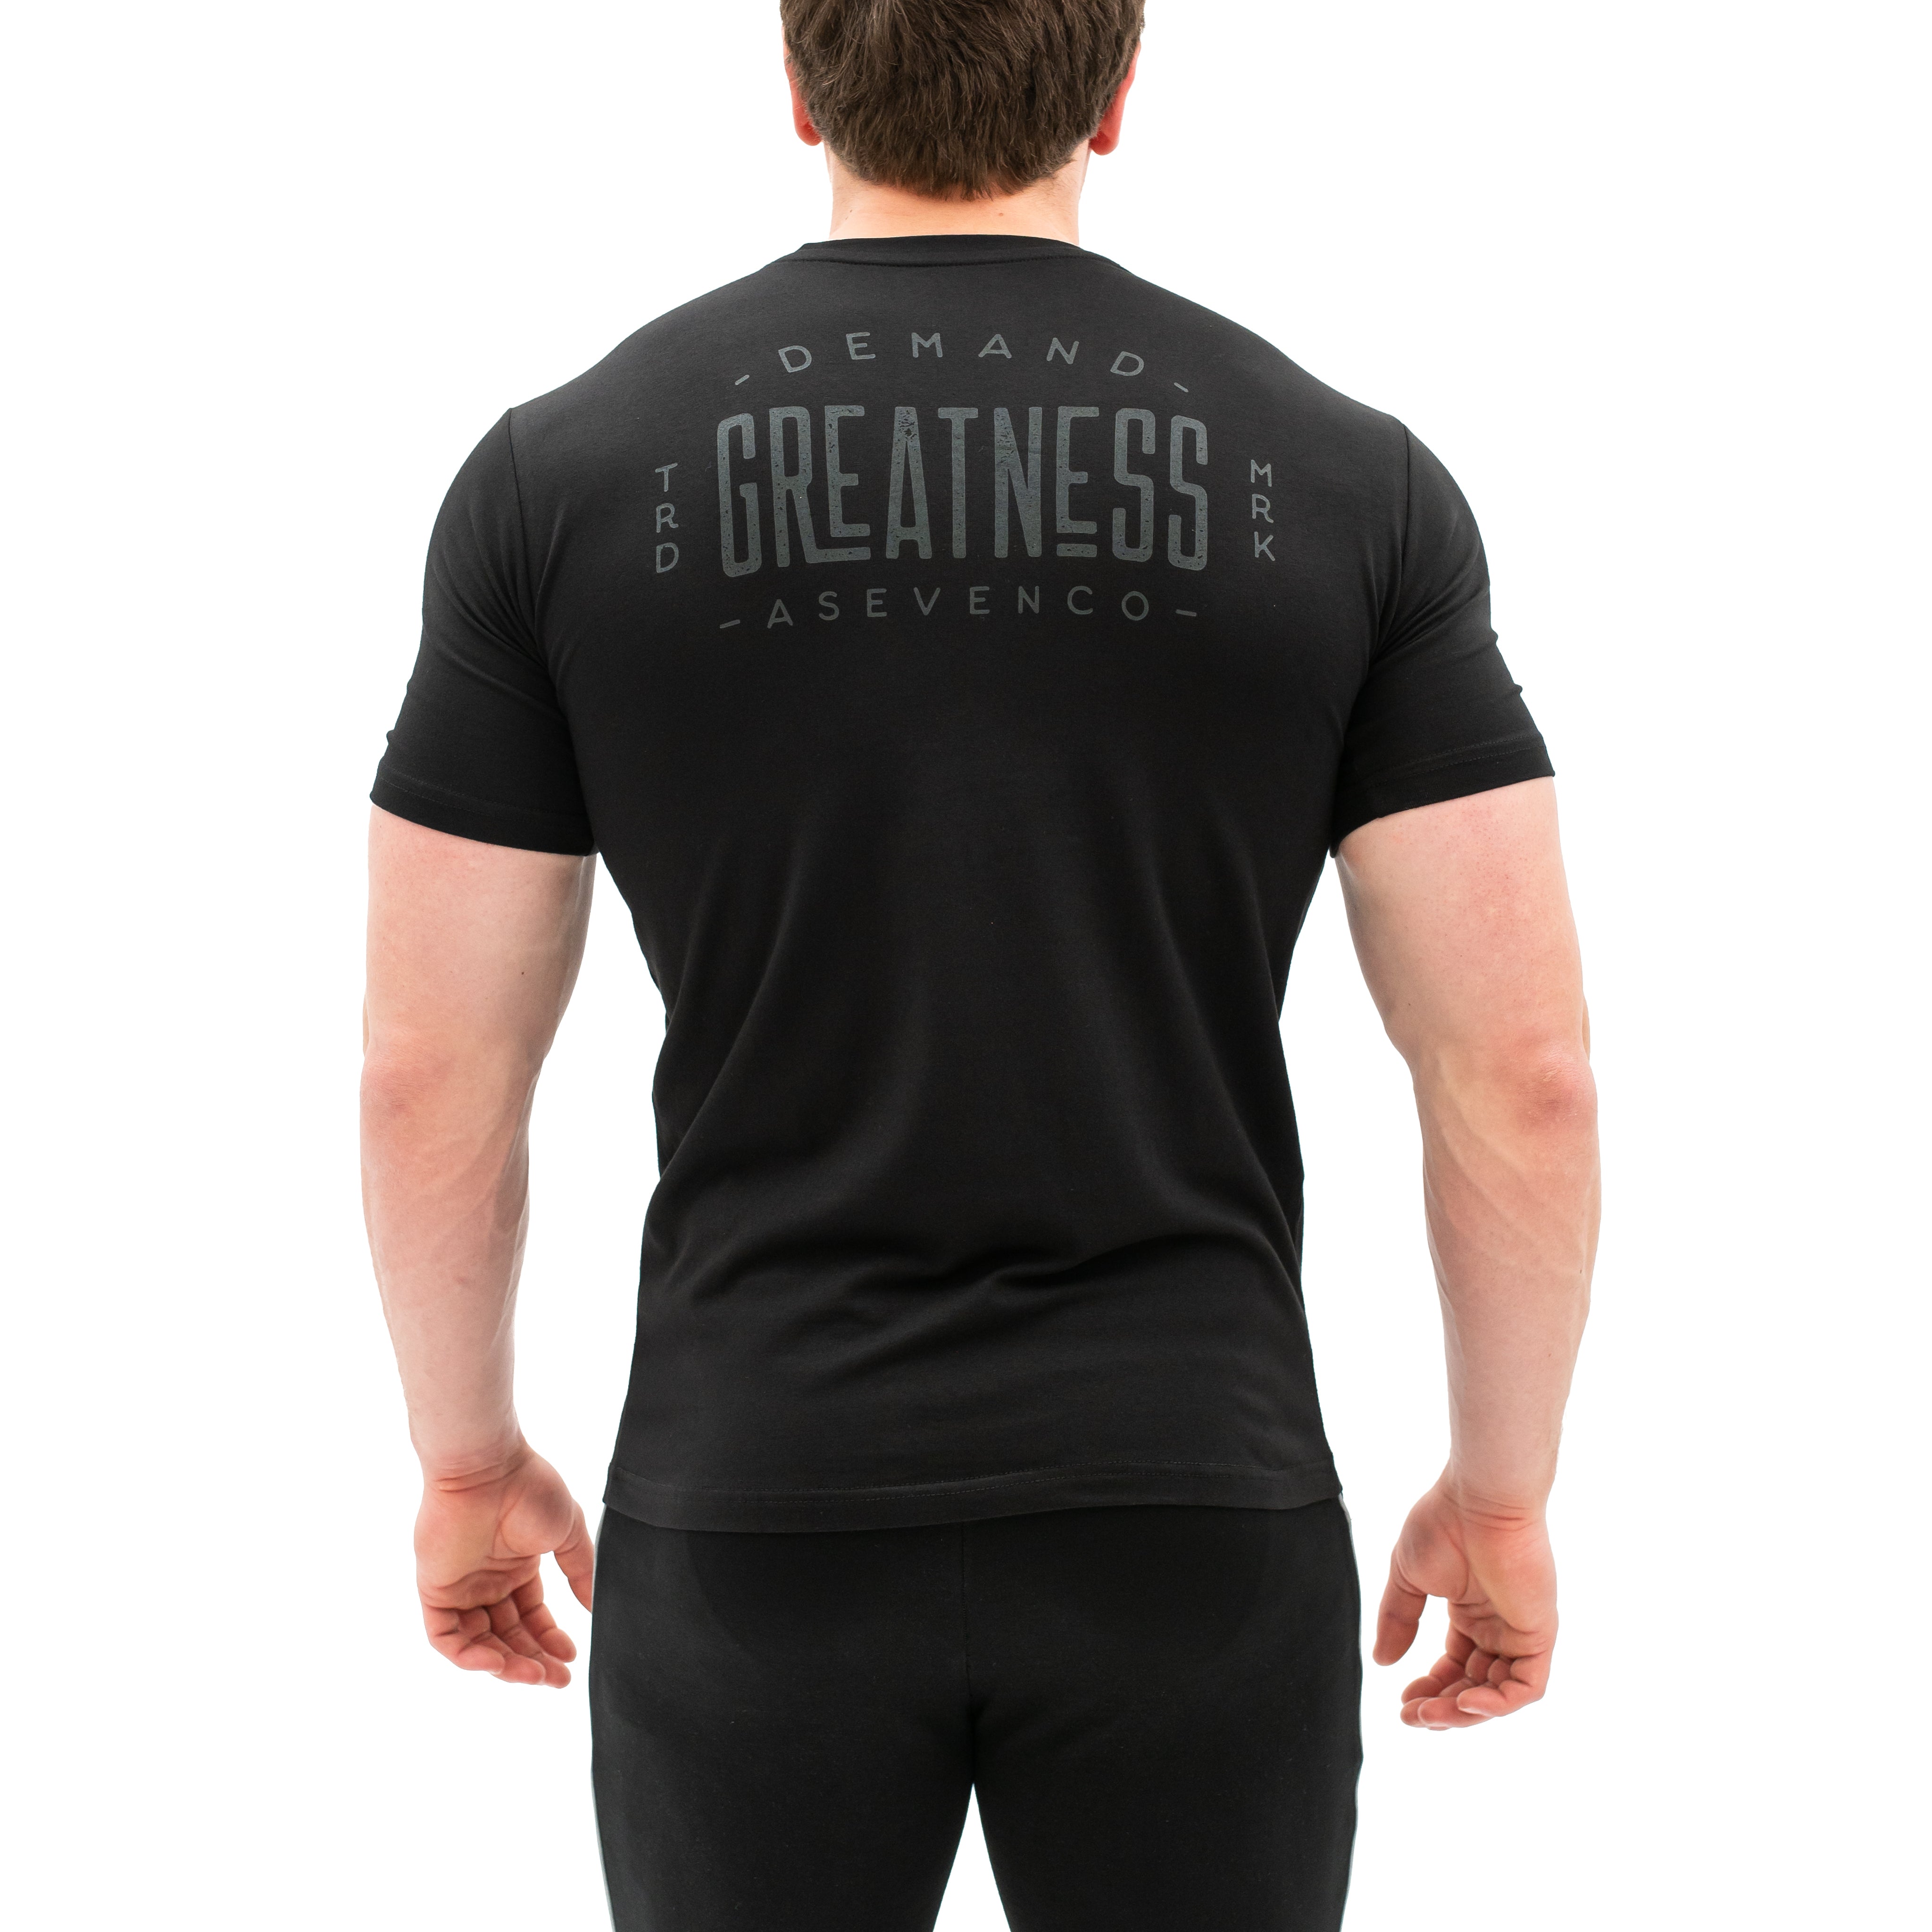 Arched Non Bar Grip T-Shirt is perfect for in and out of the gym. Purchase Arched Non Bar Grip tshirt UK from A7 UK. Purchase Arched Shirt Europe from A7 UK. Best gymwear shipping to UK and Europe from A7 UK. Arched is our newest Non Bar Grip Design. The best Powerlifting apparel for all your workouts. Available in UK and Europe including France, Italy, Germany, Sweden and Poland.